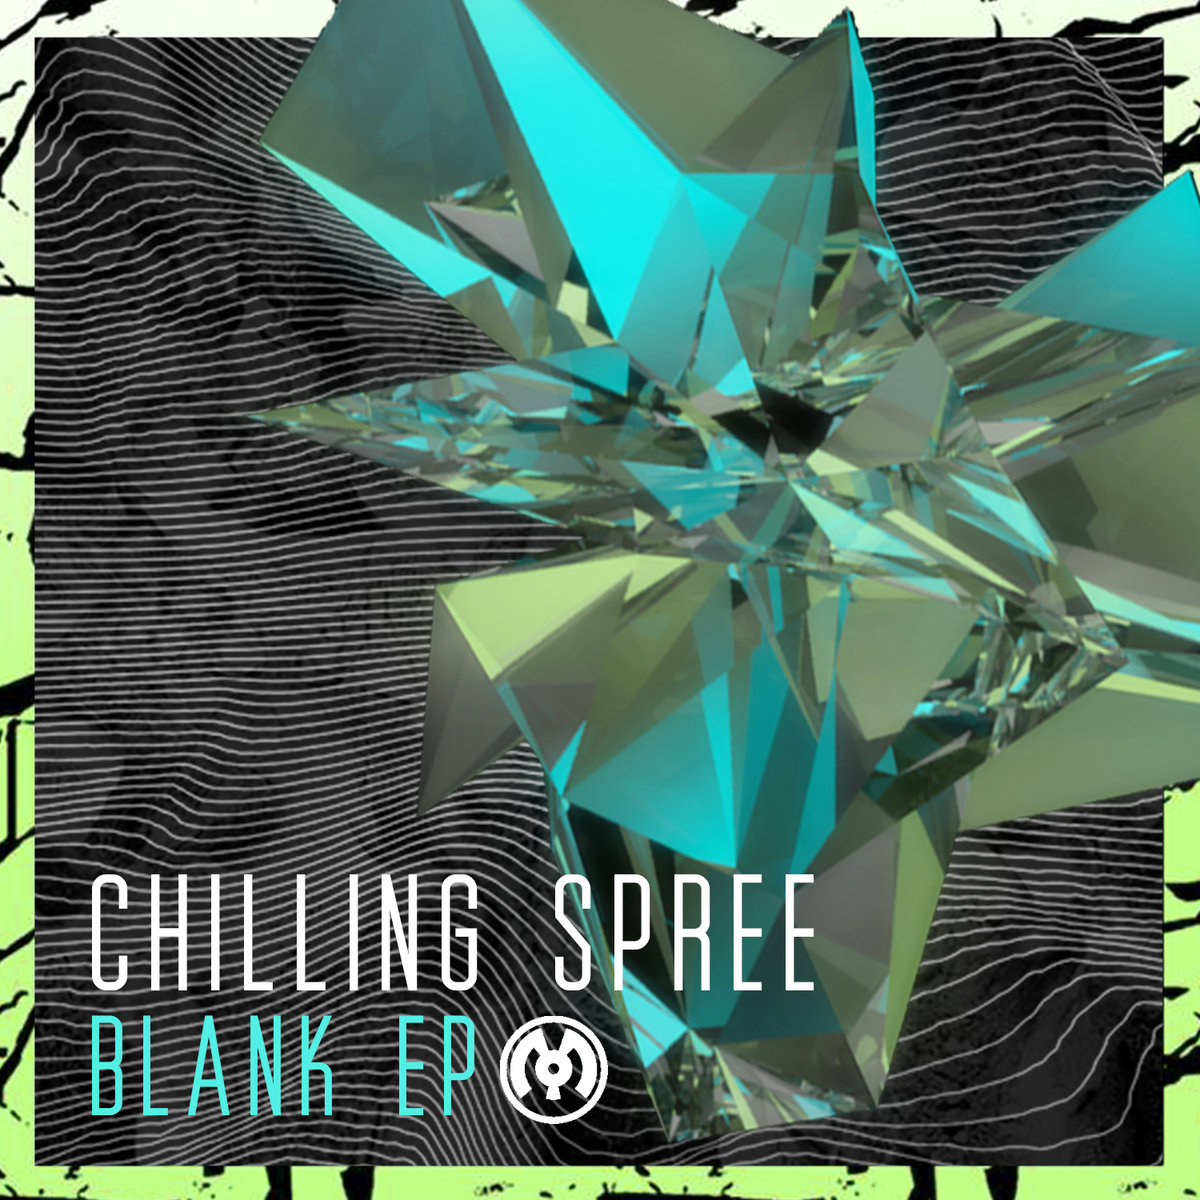 Chilling Spree - Ice Kream @ 'The Blank EP' album (electronic, dubstep)